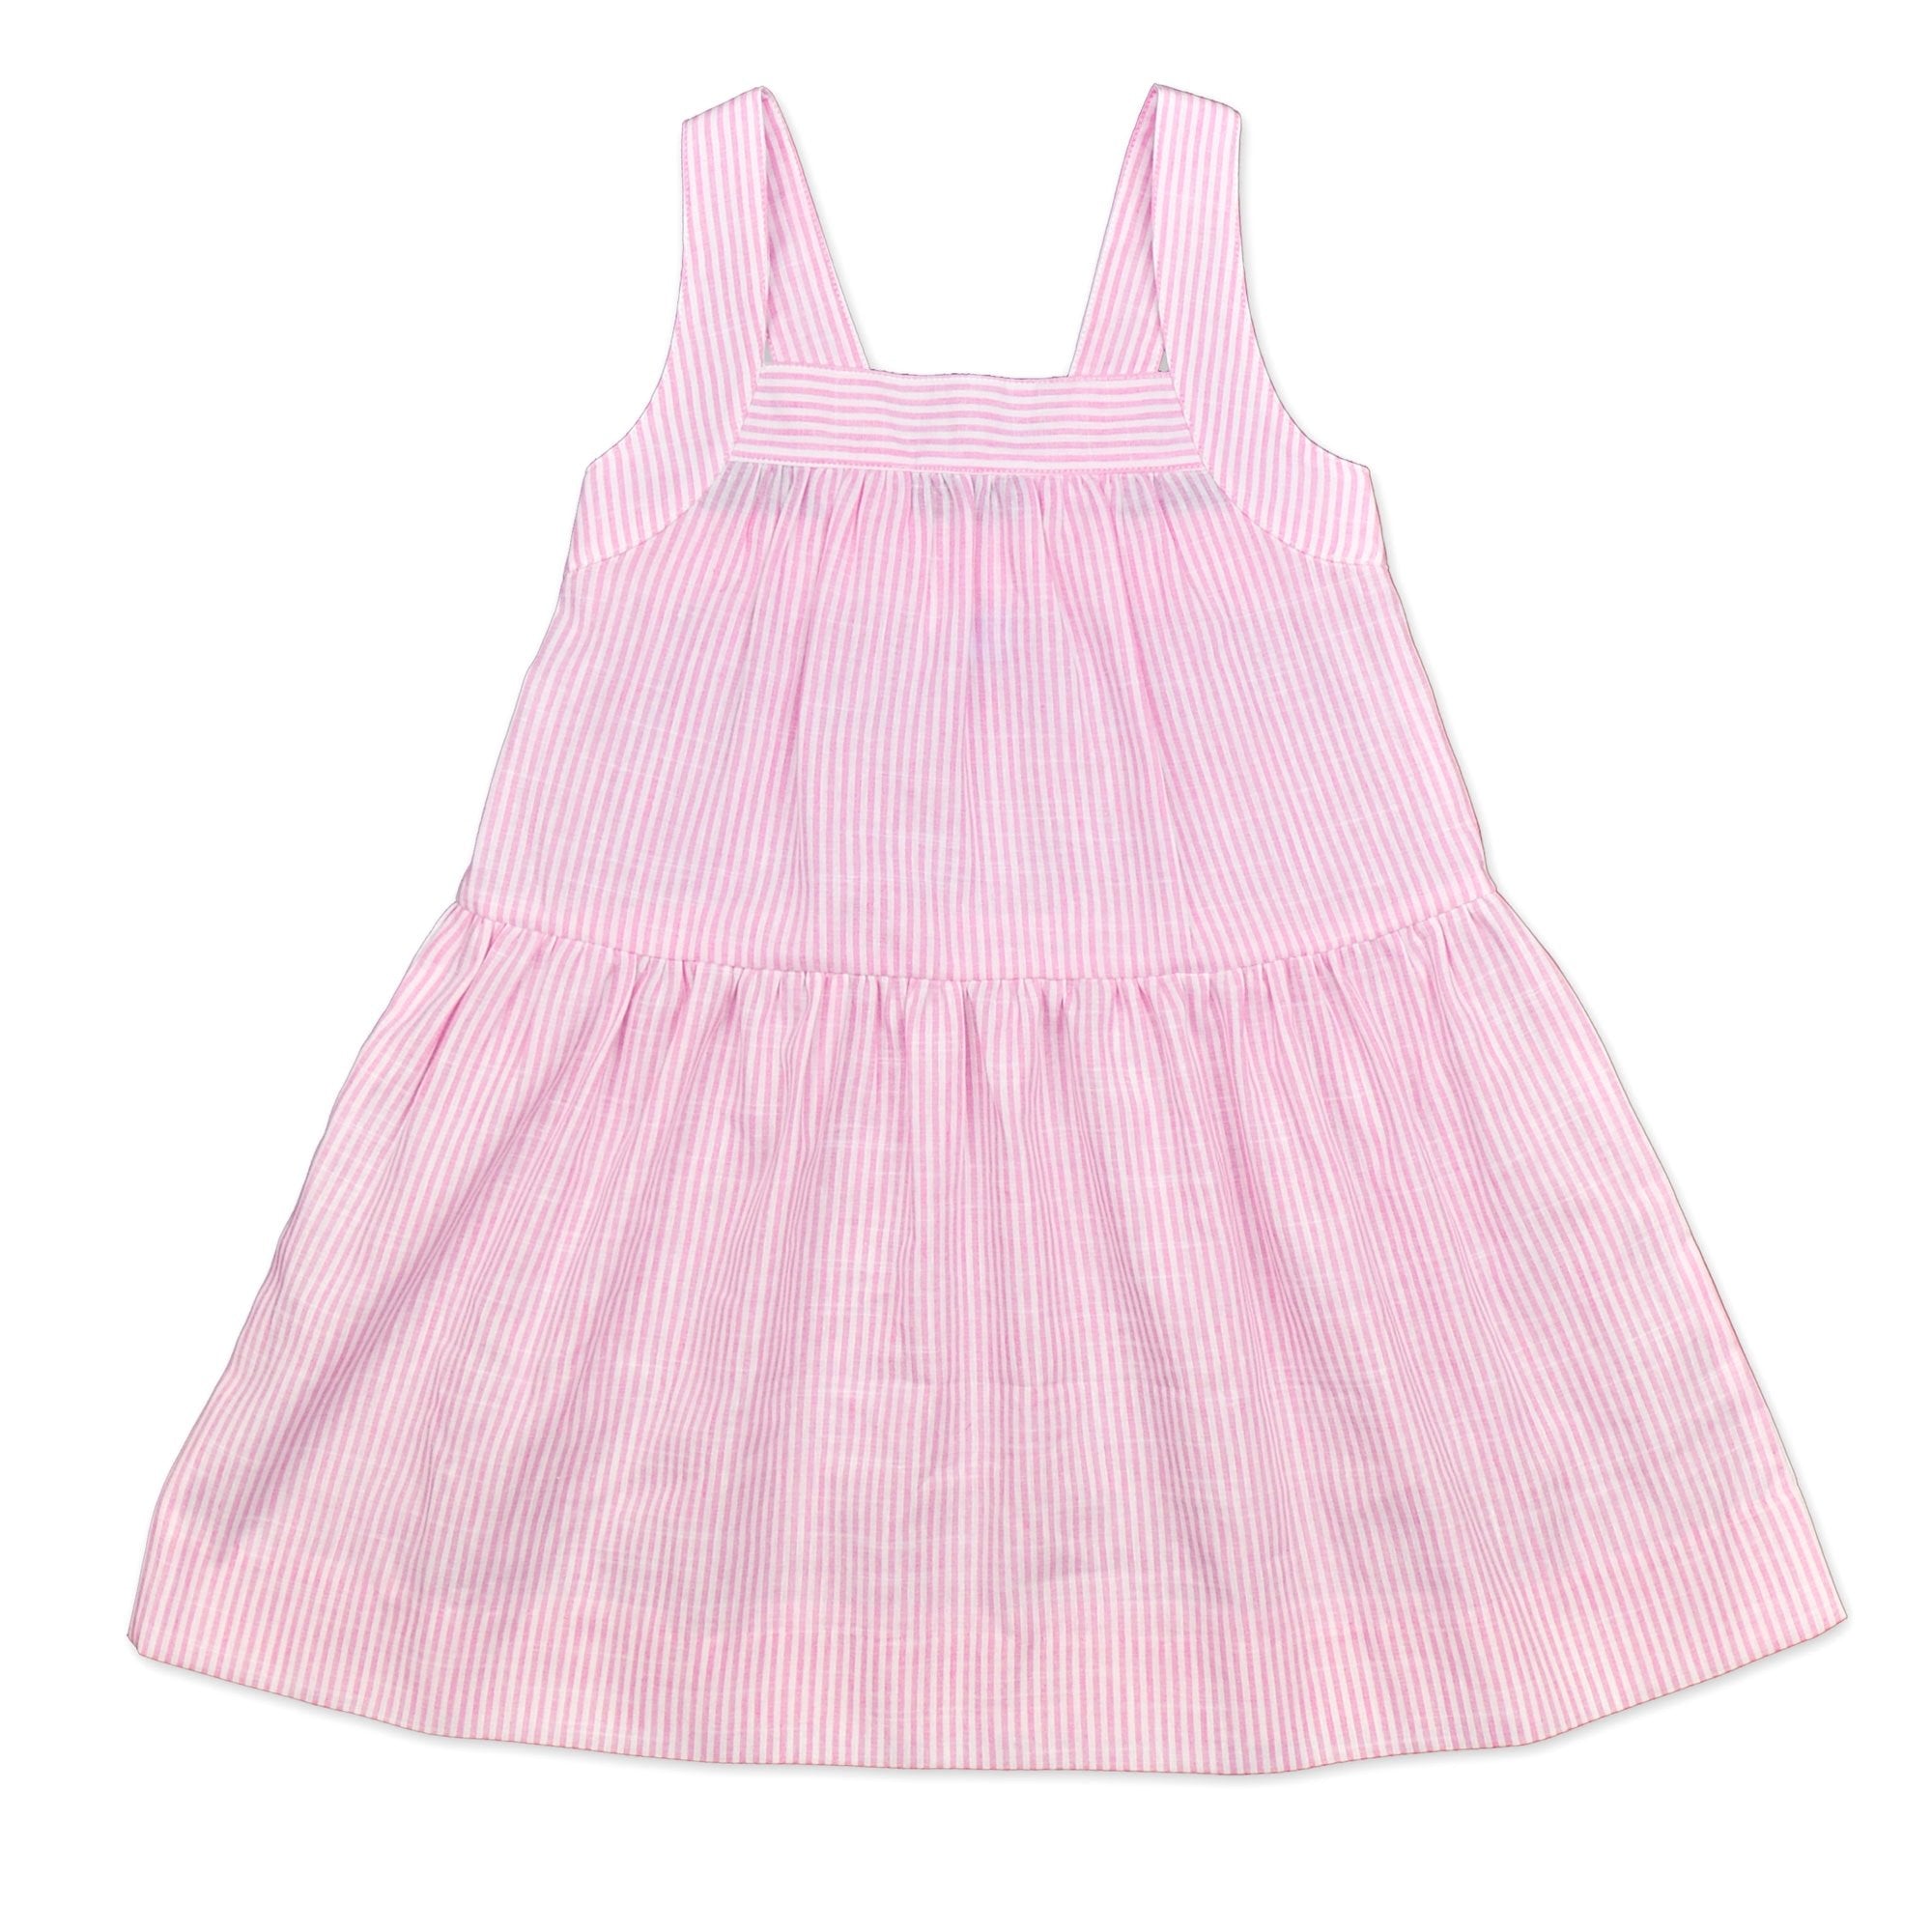 Camilla Dress In Pale Pink And White Stripe - Cou Cou Baby